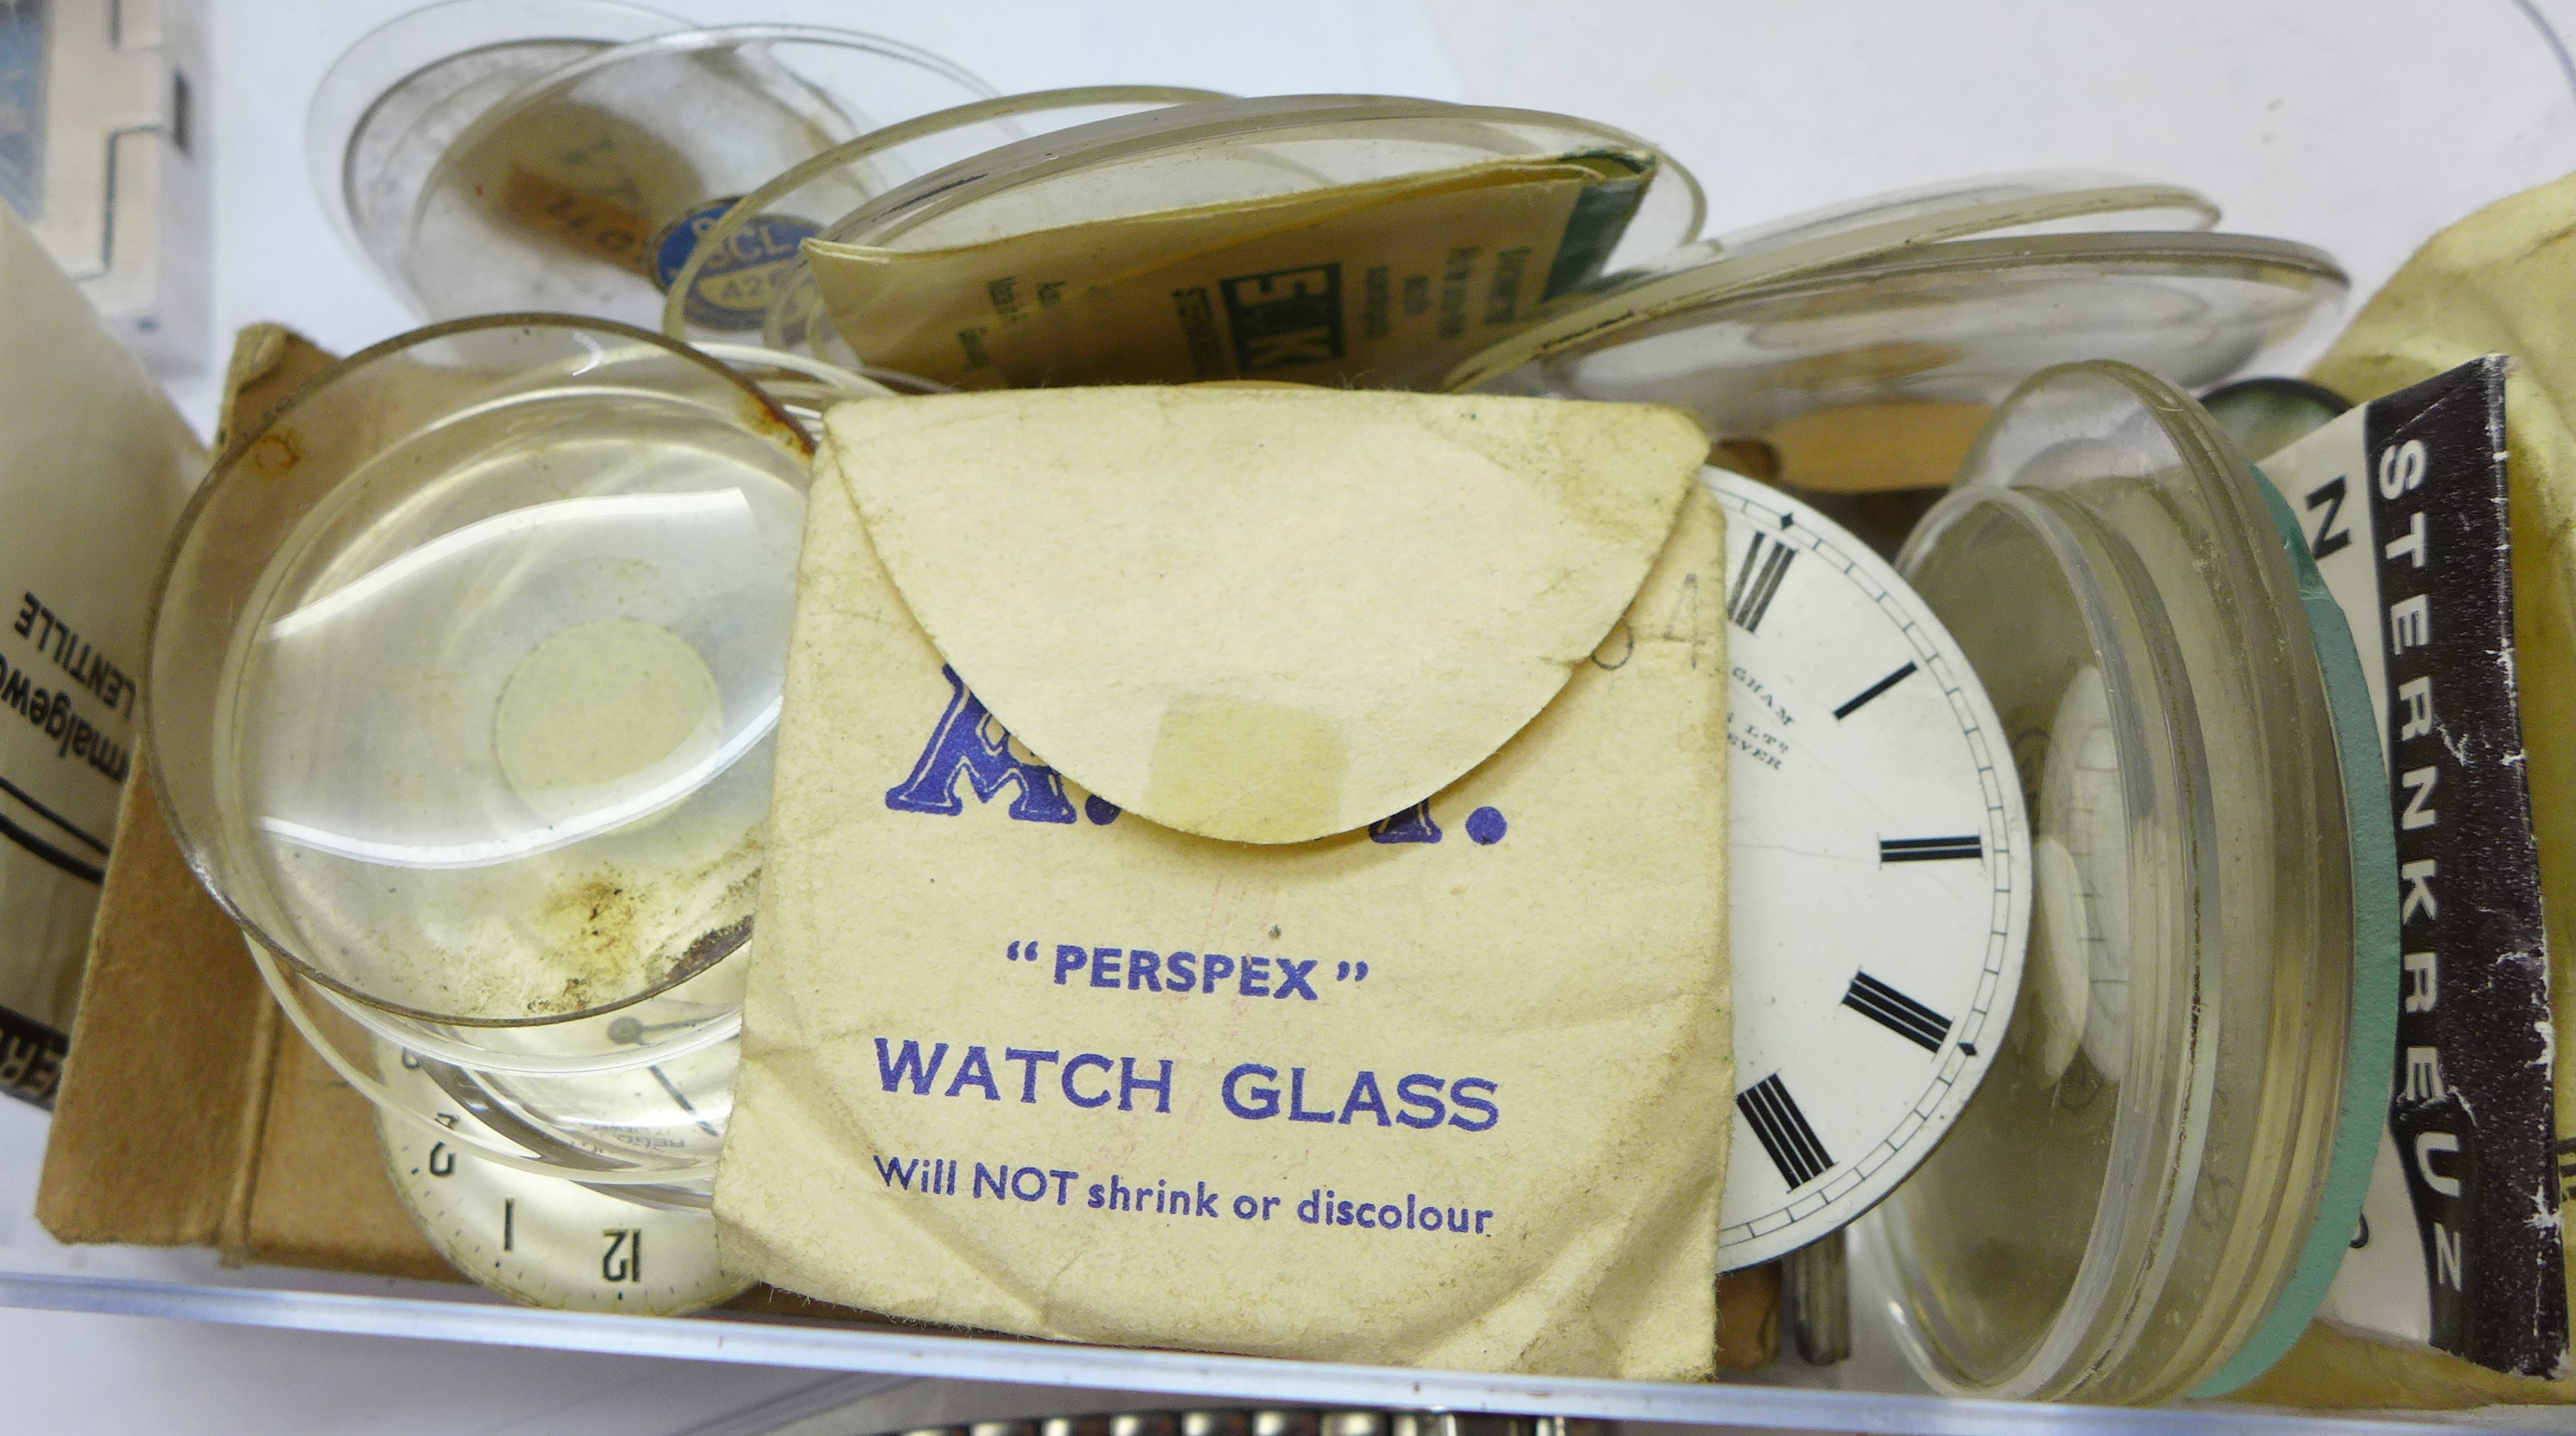 Wristwatches including Seiko and Accurist, watch glasses, etc. - Image 7 of 8